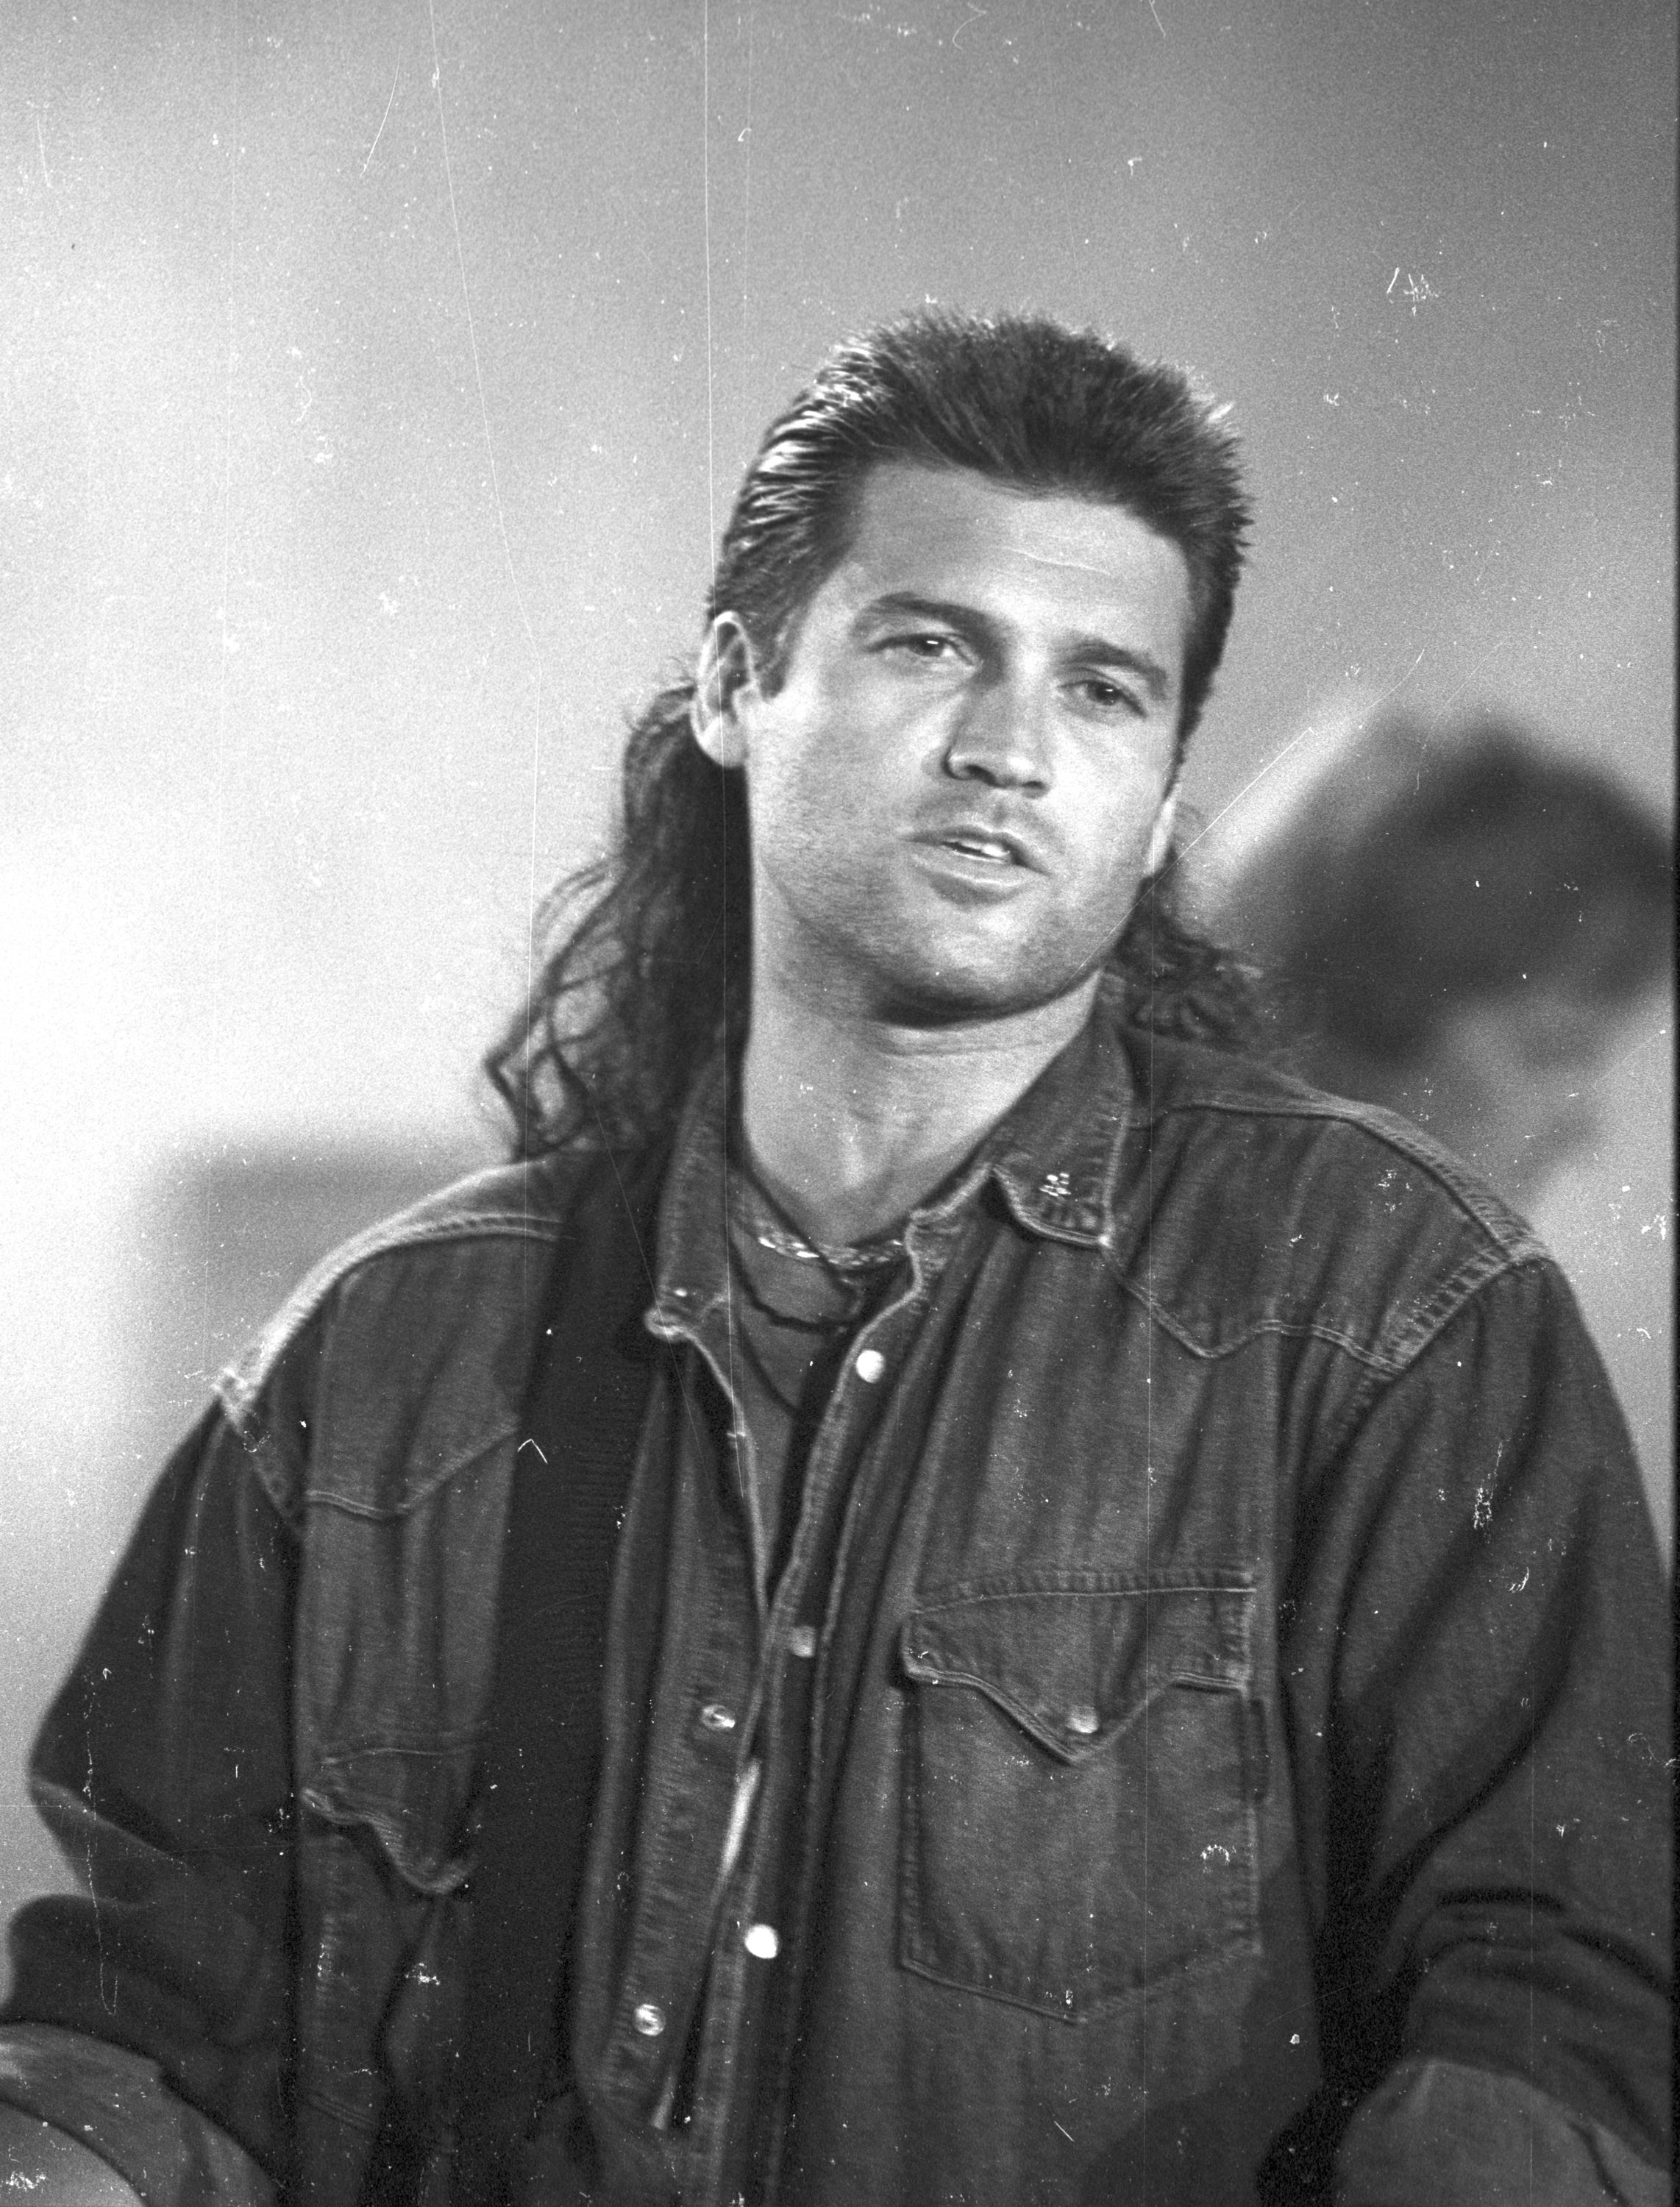 billy ray cyrus achy breaky heart mullet